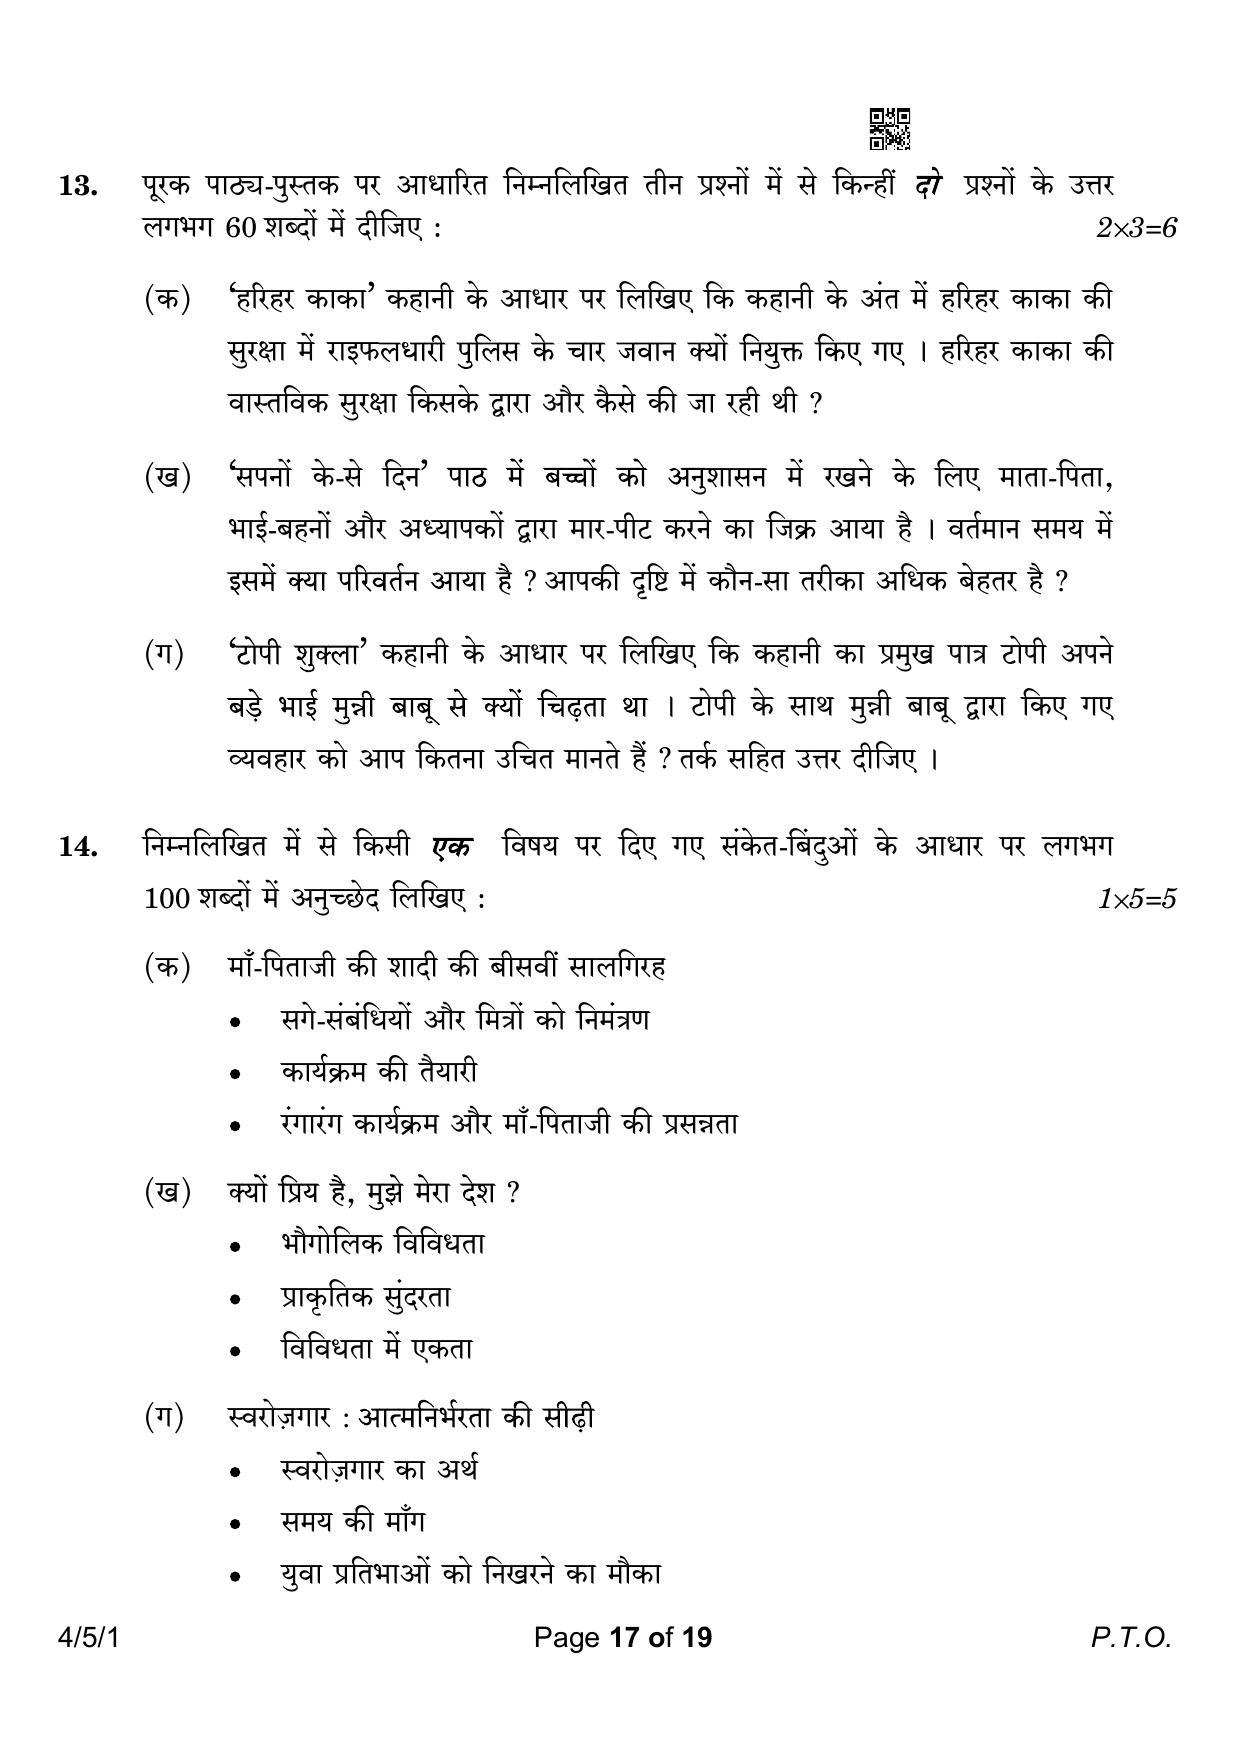 CBSE Class 10 4-5-1 Hindi B 2023 Question Paper - Page 17